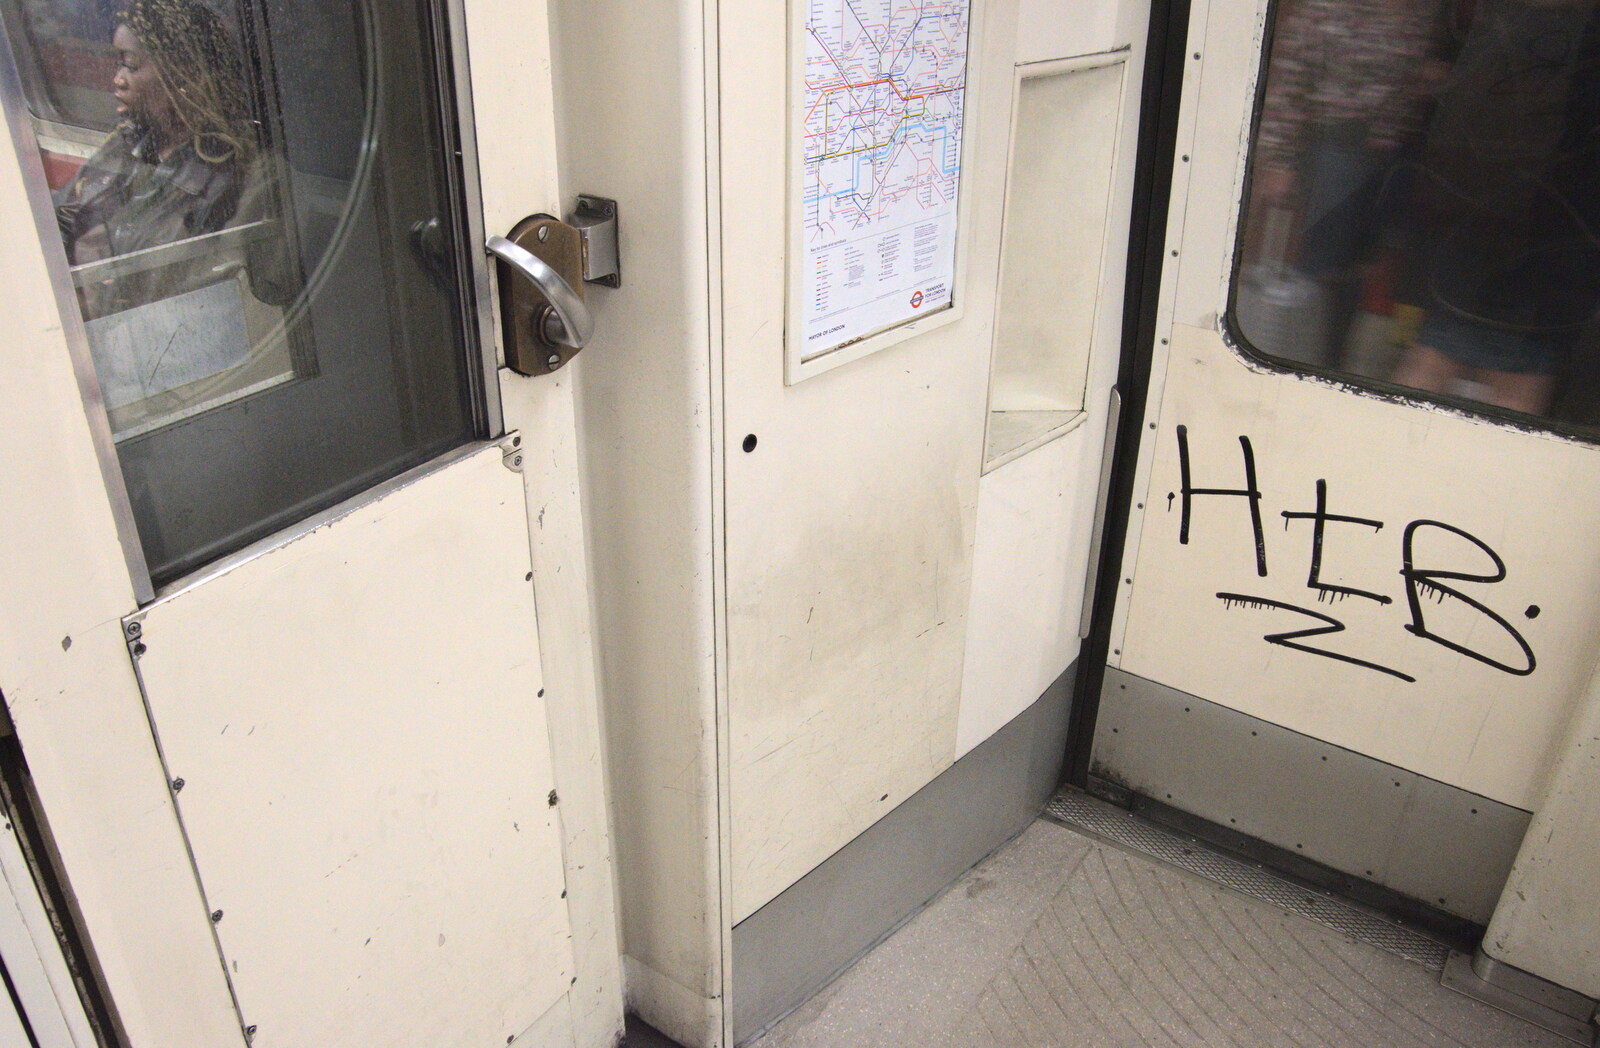 Graffiti on the door of an old tube train from A Day in New Milton, Hampshire - 3rd April 2023